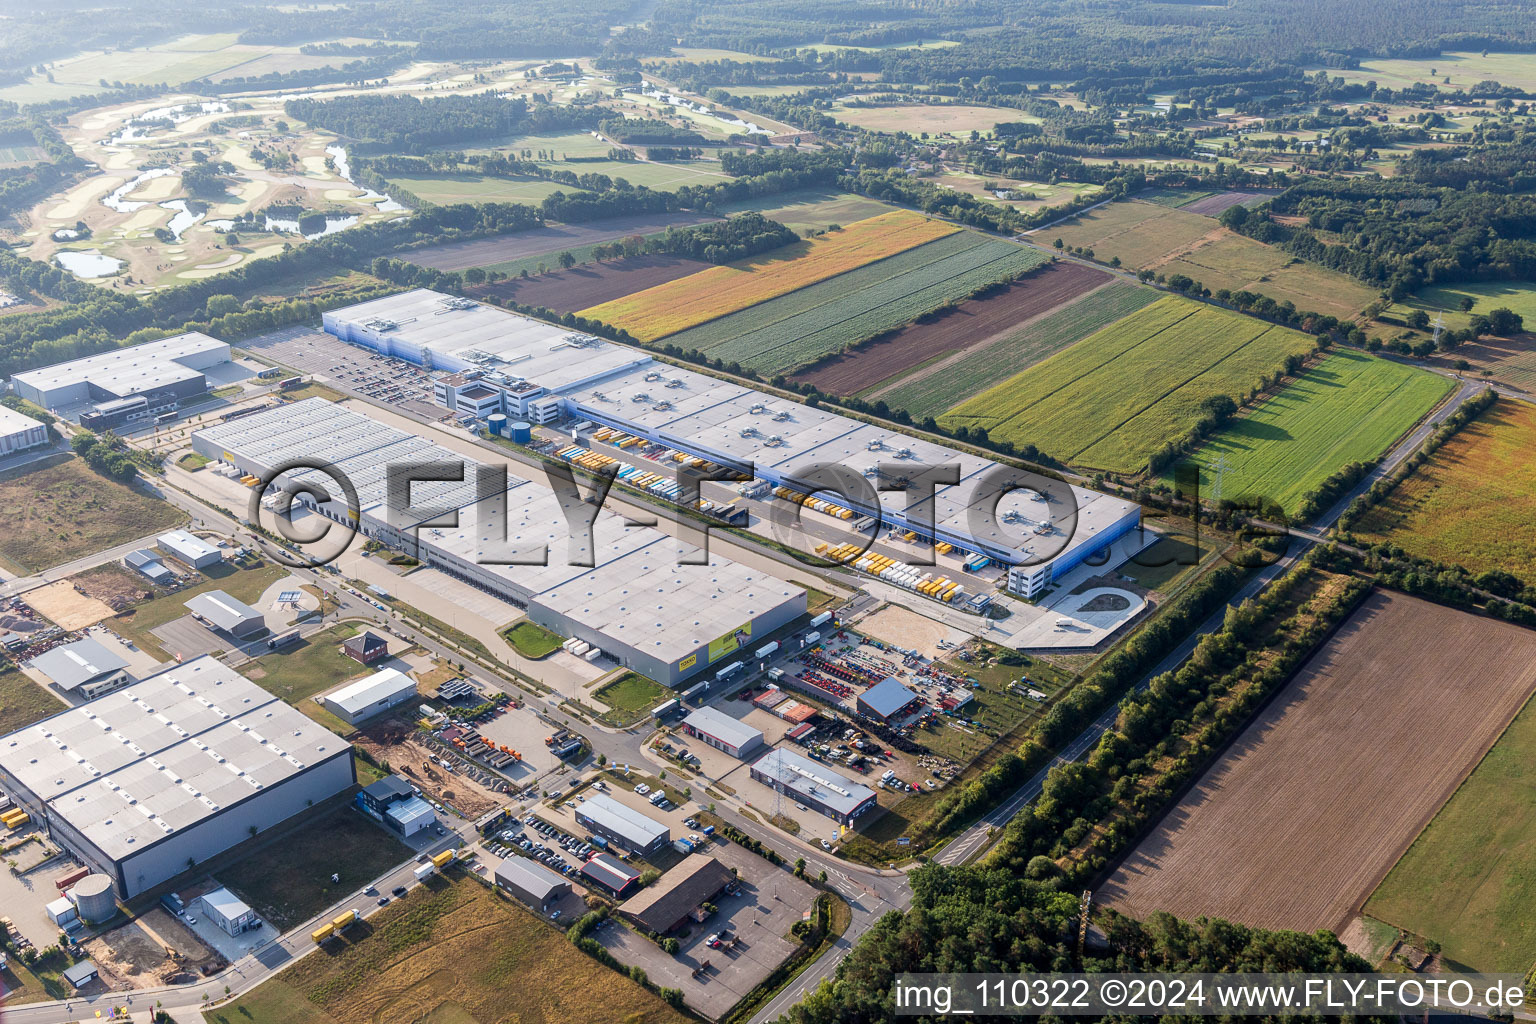 Building complex and grounds of the logistics center Amazon Logistik Winsen GmbH - HAM2 in Winsen (Luhe) in the state Lower Saxony, Germany